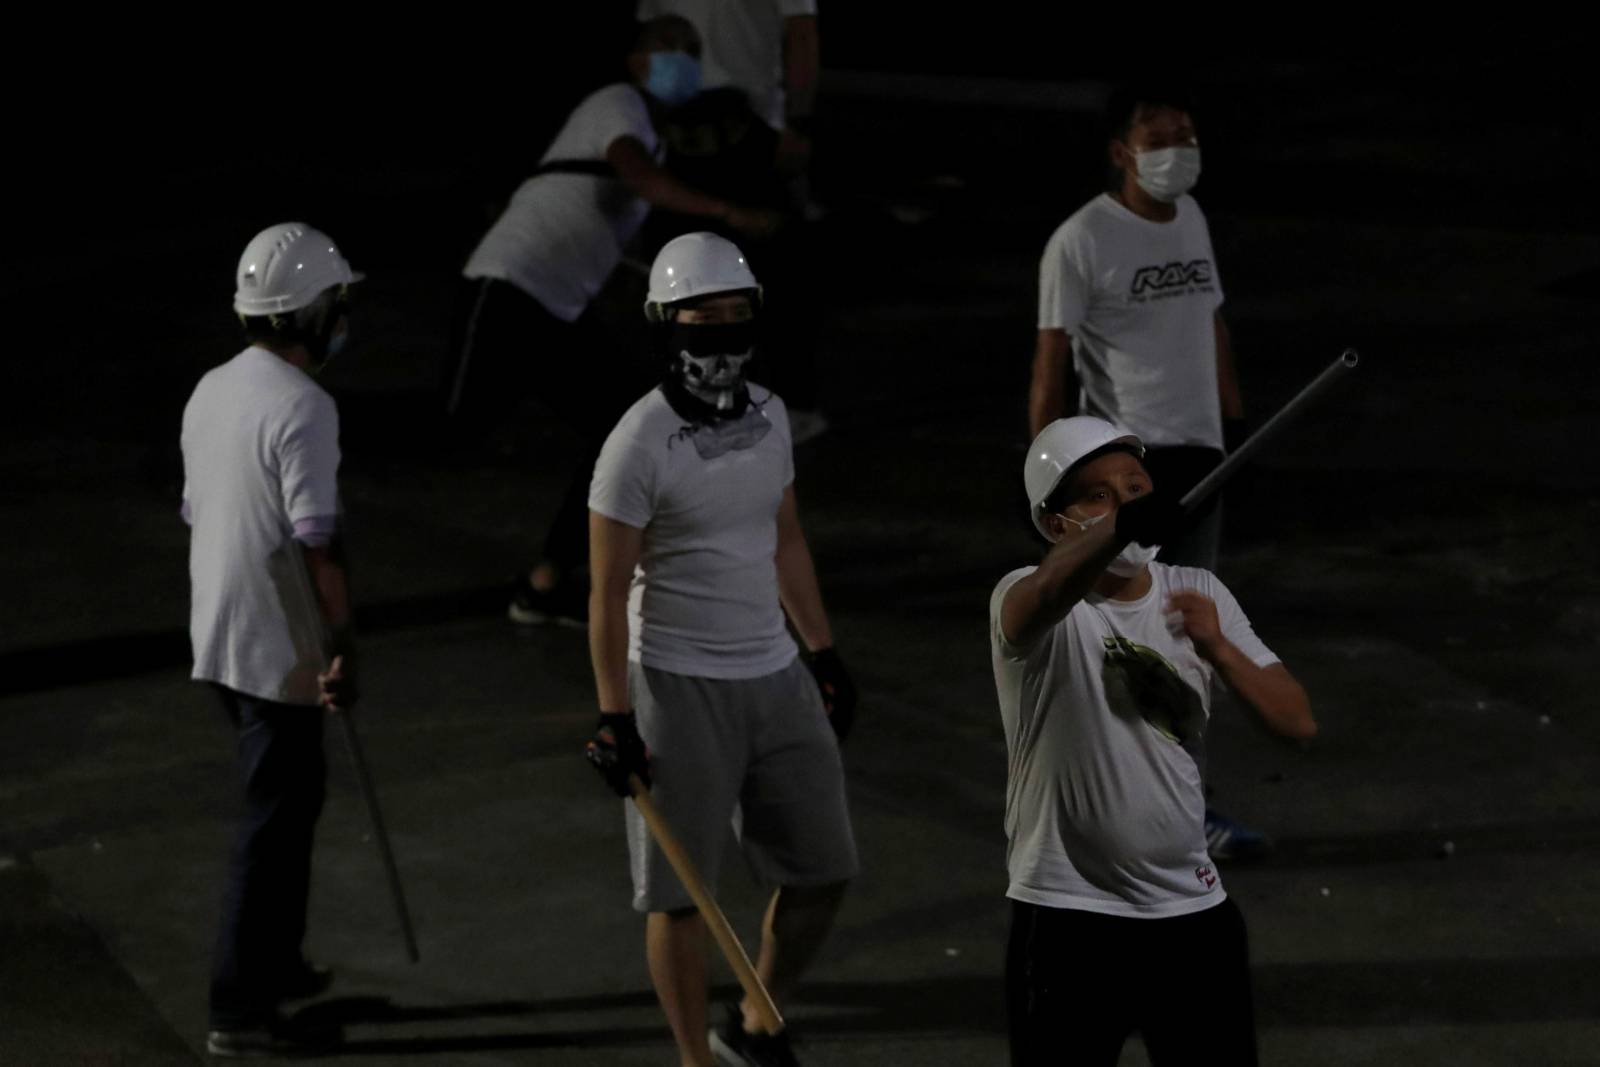 Men in white T-shirts react in Yuen Long after attacking anti-extradition bill demonstrators at a train station in Hong Kong